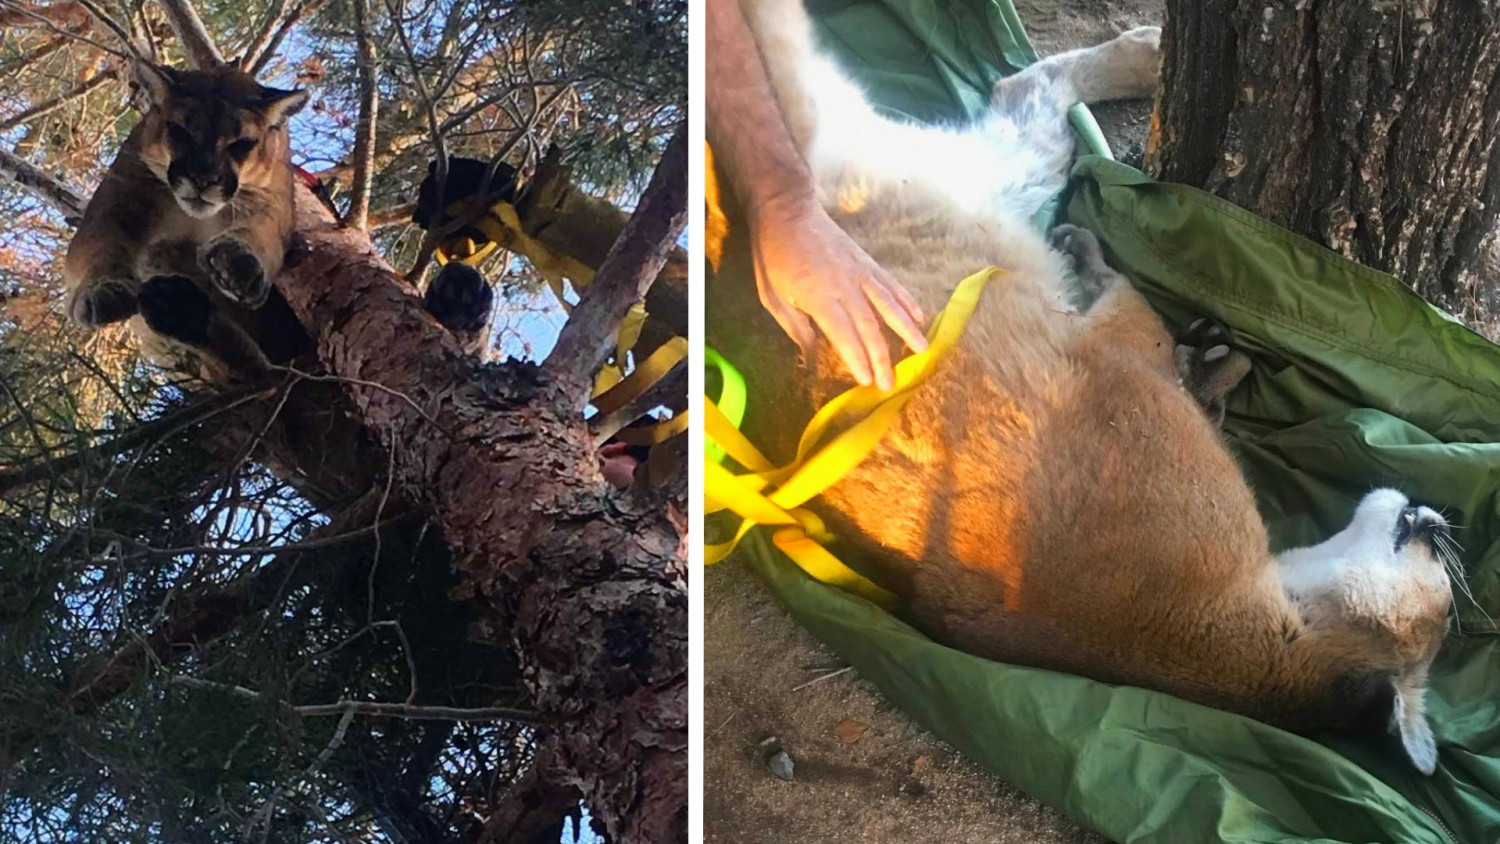 Mountain Lion Removed From Tree in California Backyard